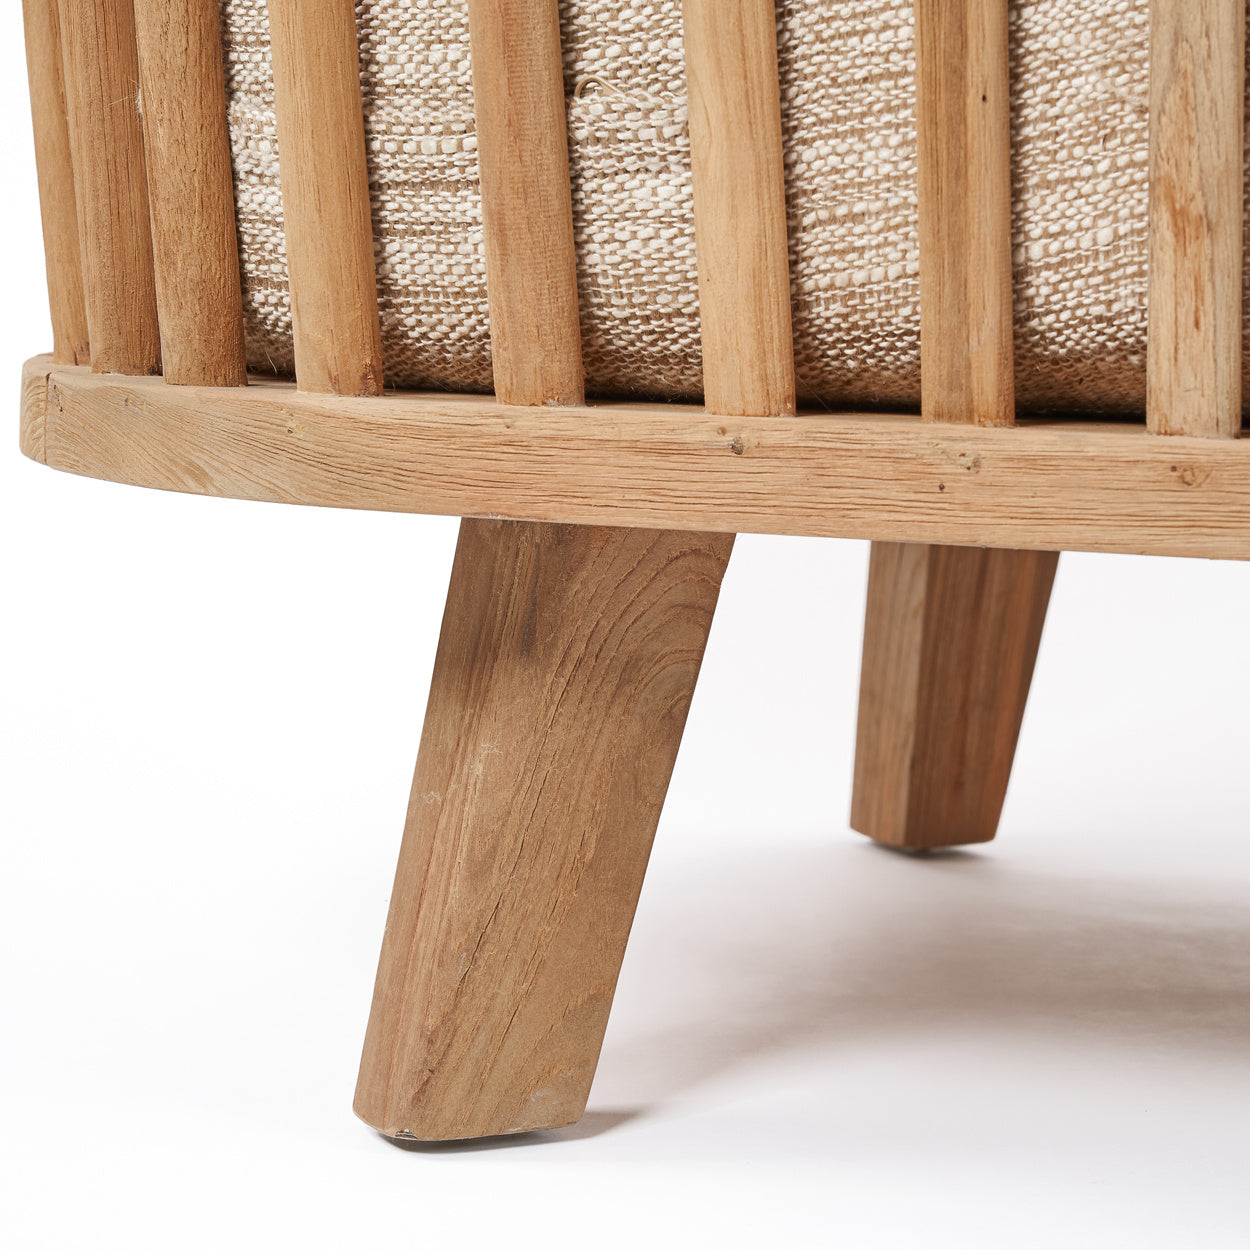 THE MALAWI Daybed Natural Legs